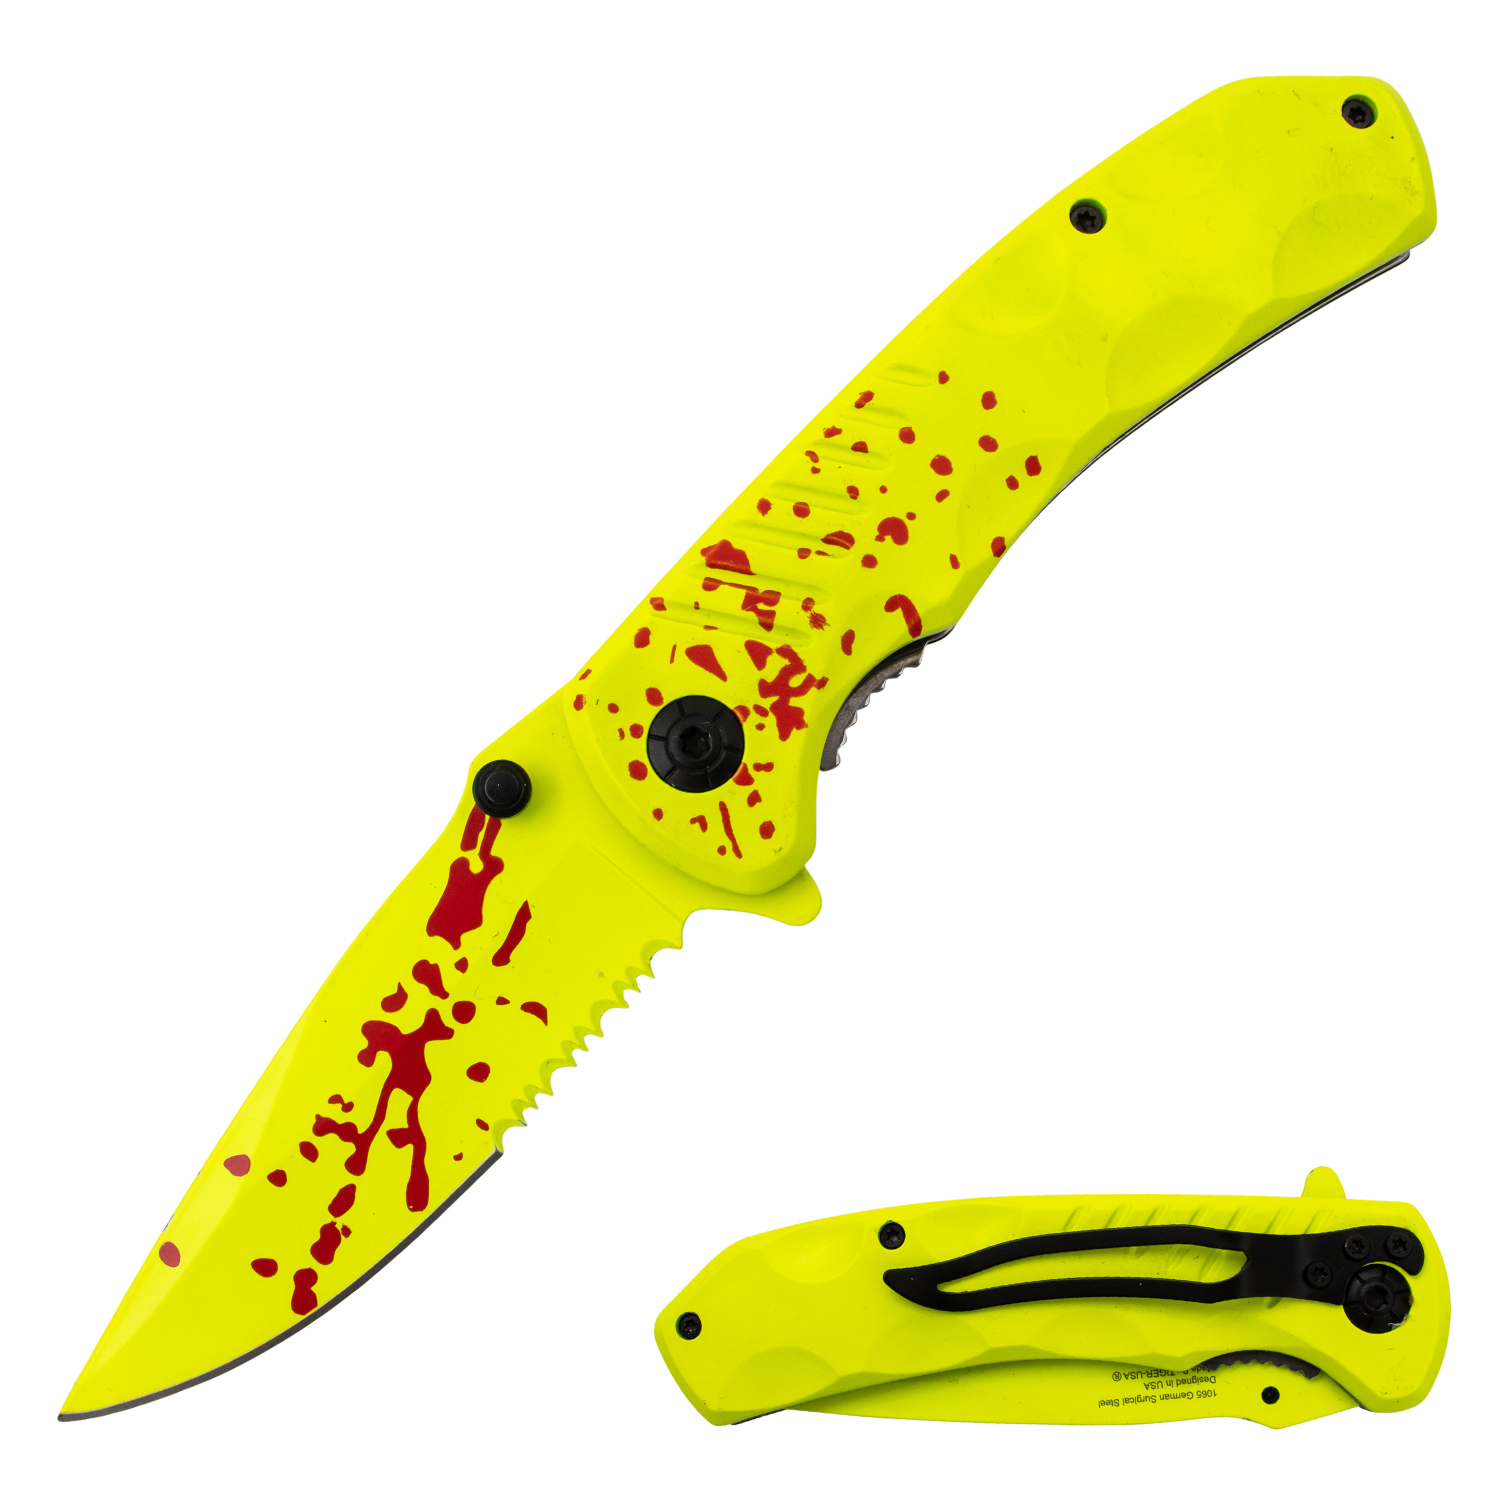 Tiger USA Trigger Action Knife Yellow Blood Handle